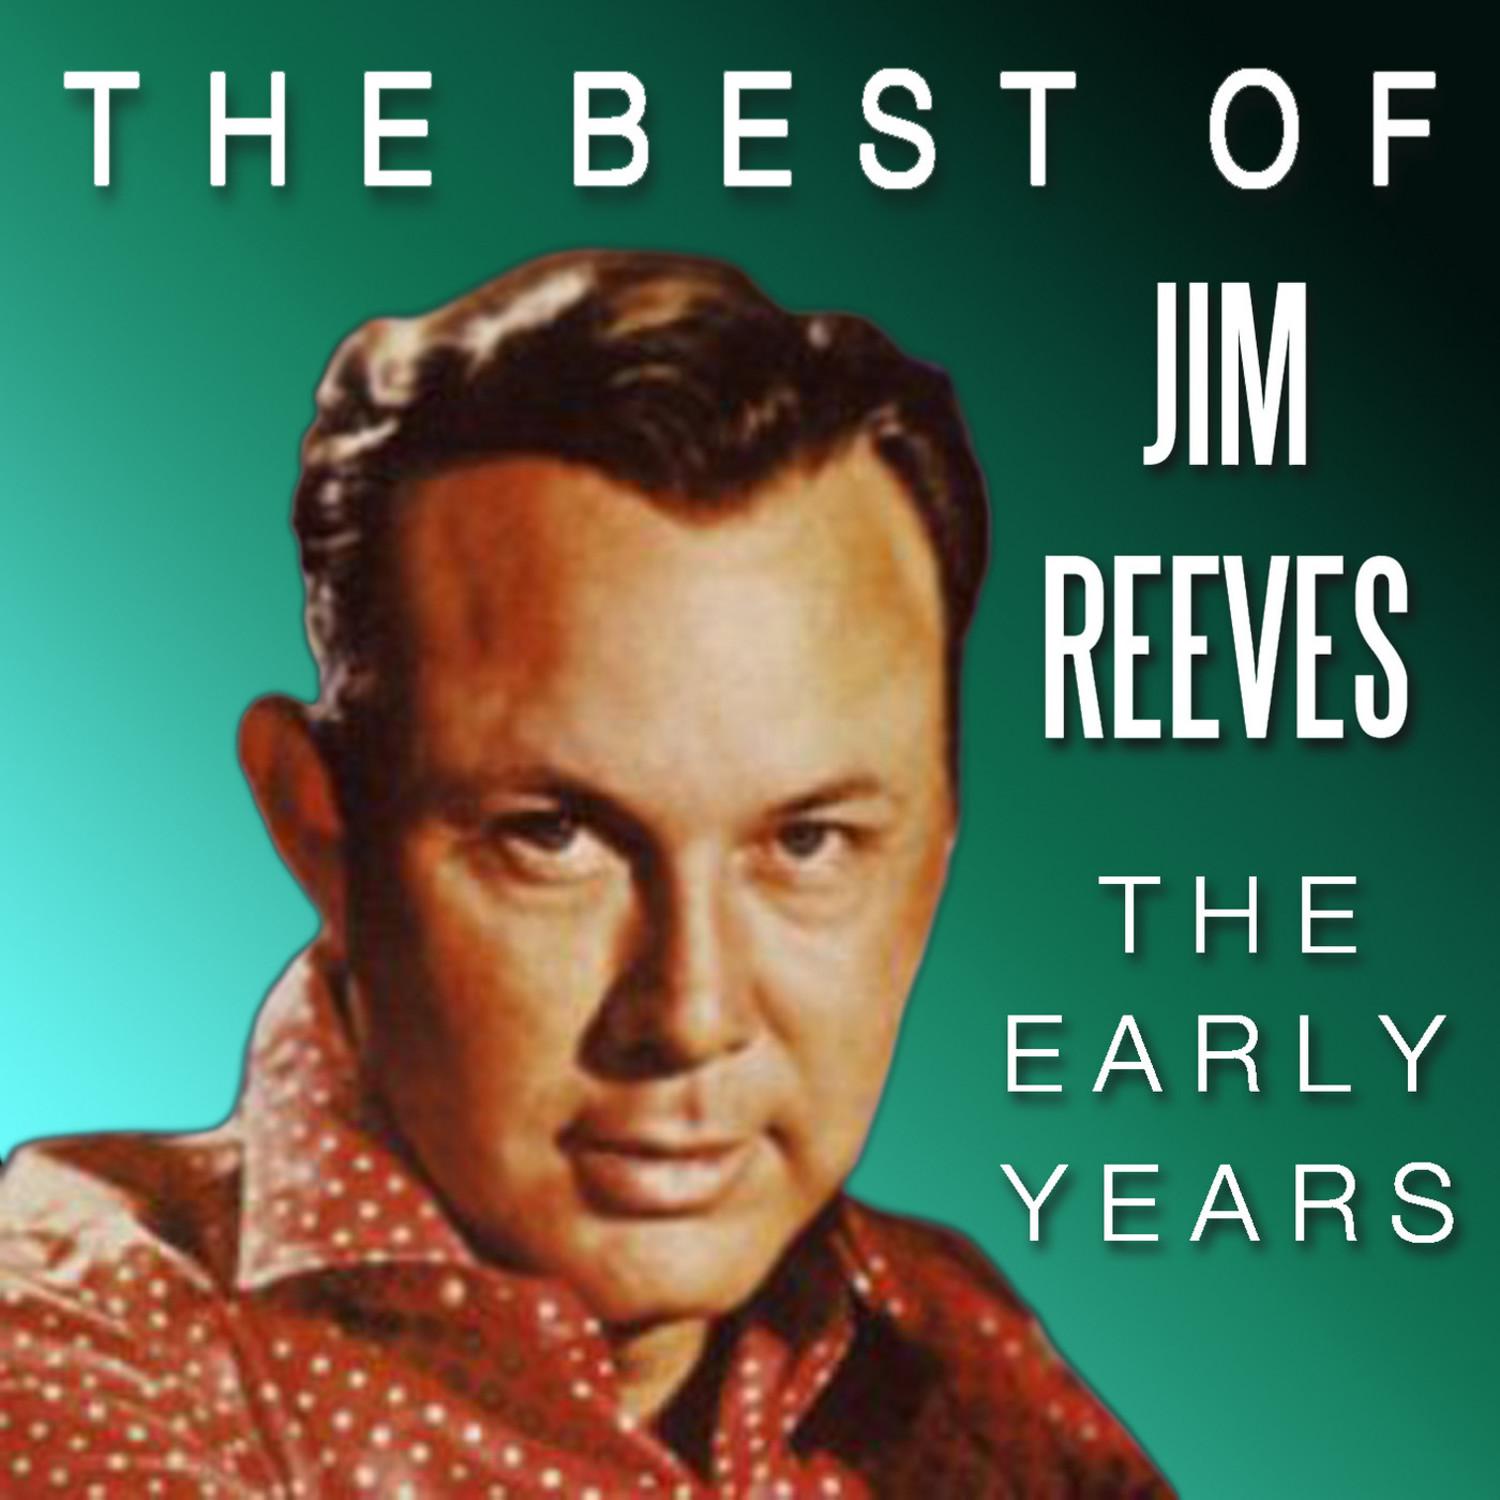 The Best of Jim Reeves - The Early Years